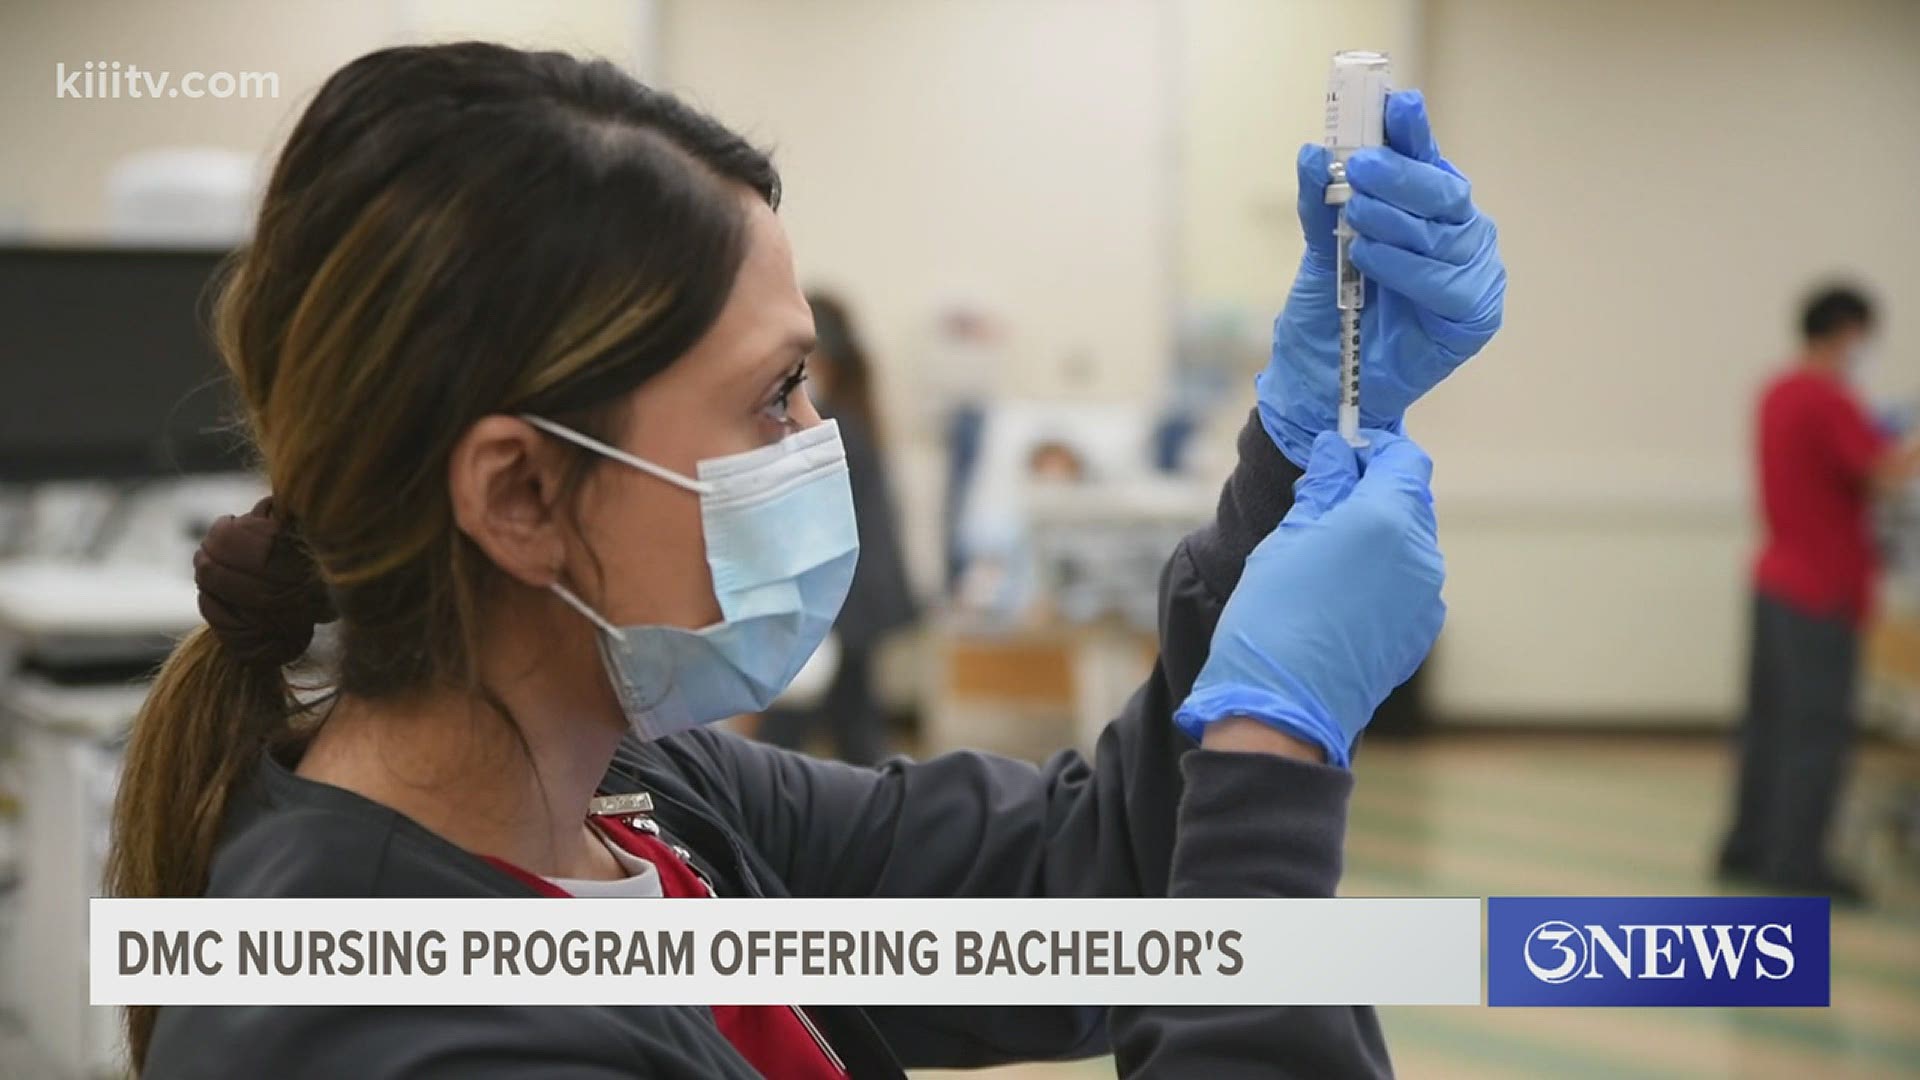 The full-time RN to BSN program is designed for Registered Nurses who already have an associate degree. It takes just three semesters to complete.